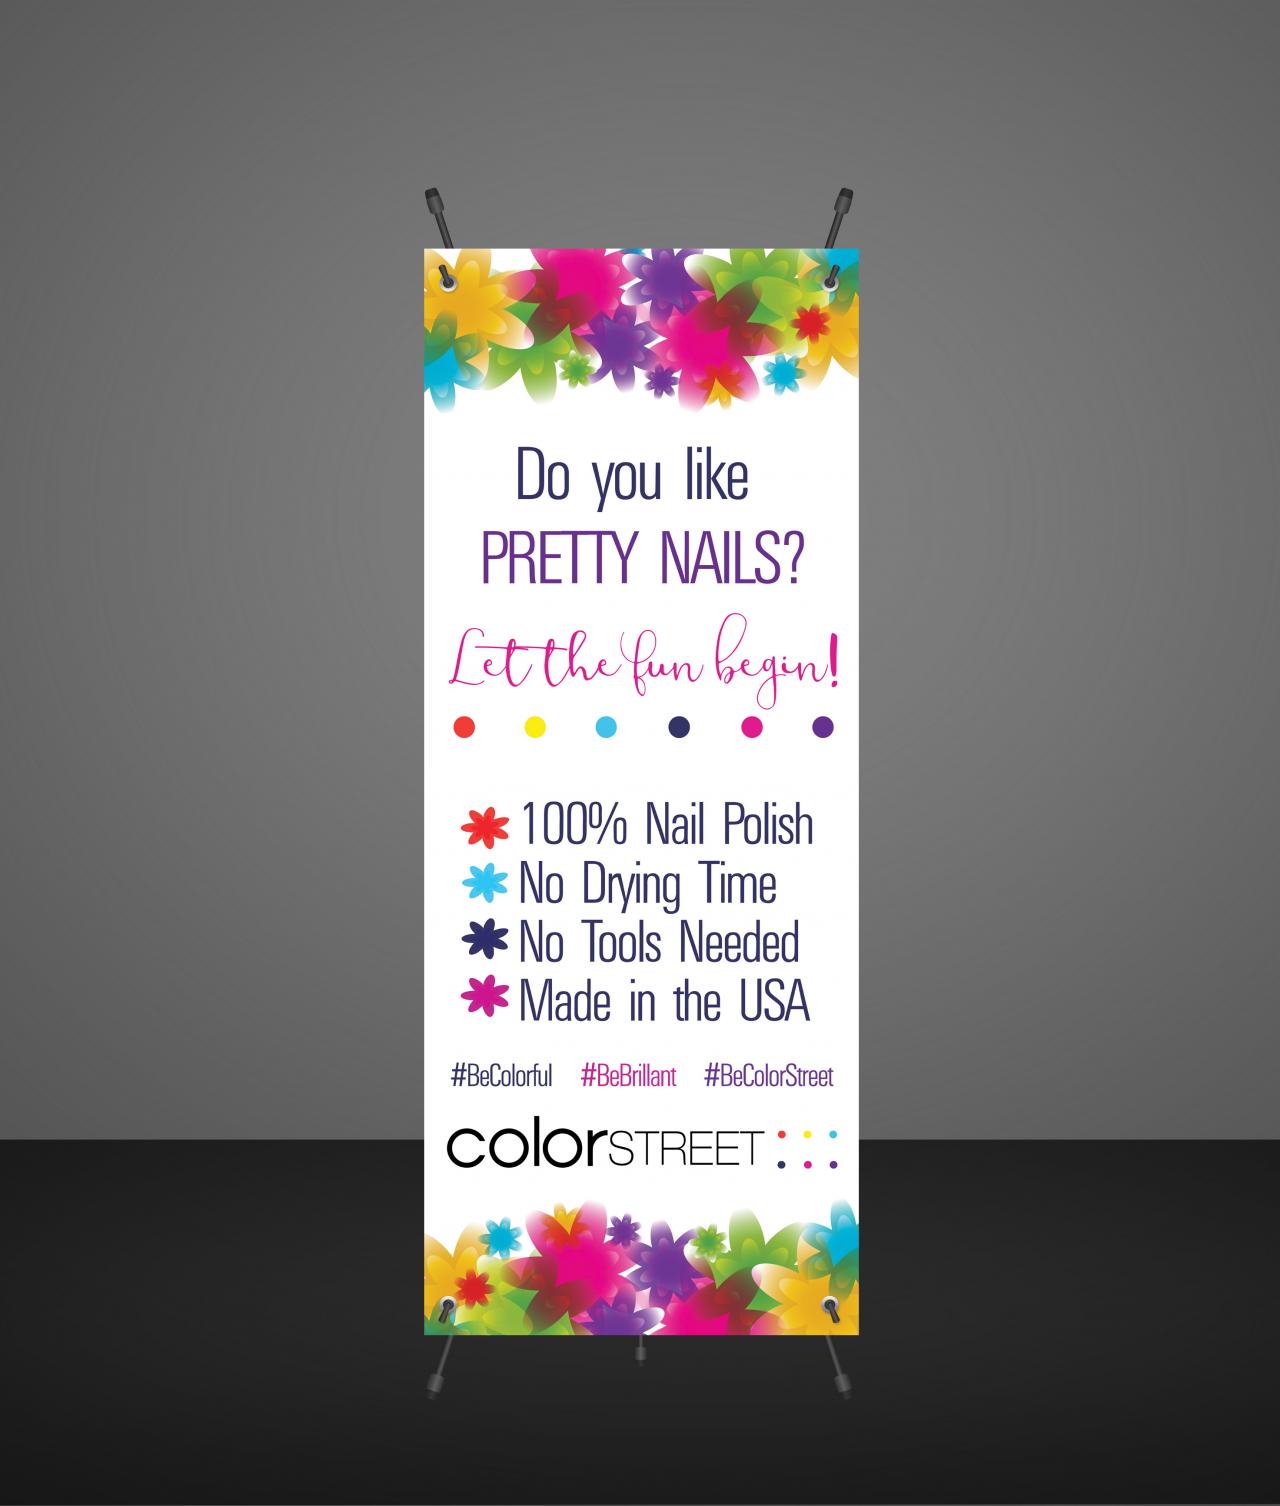 Digital Color Street Nail Stylist Banner -product Display - Vendor Show- Instant Download- Colorful Flowerus